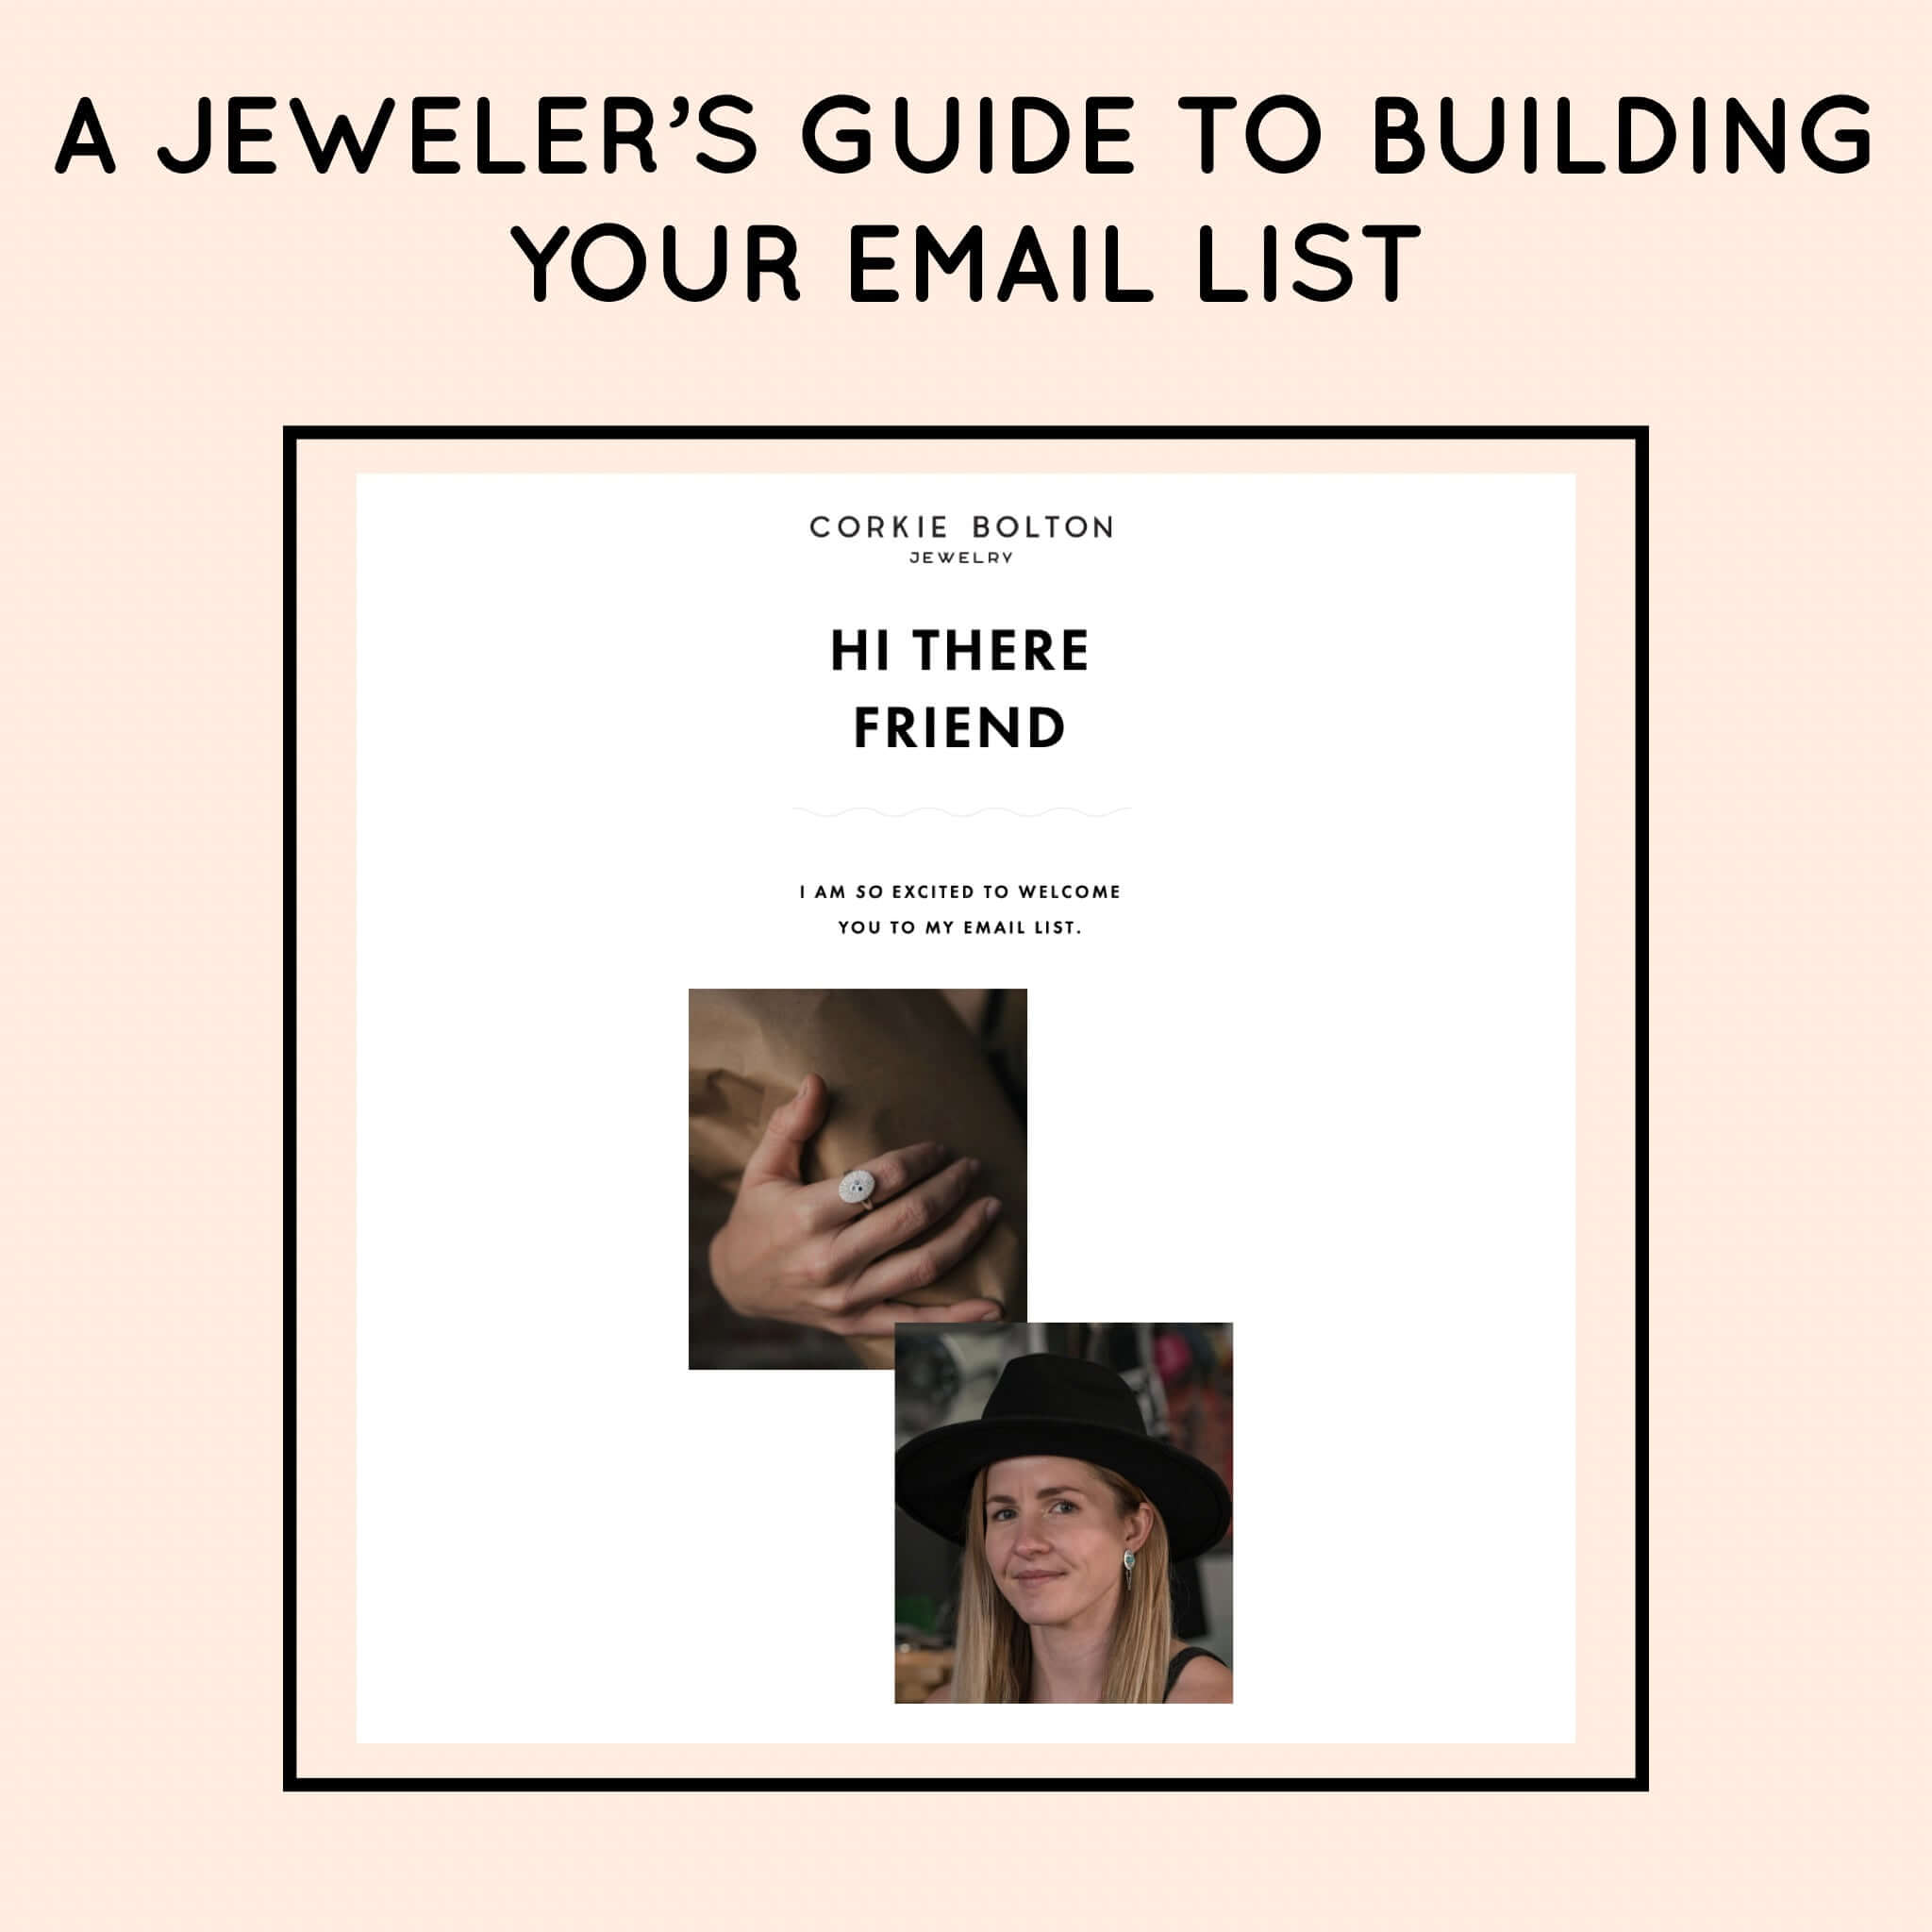 A JEWELER'S GUIDE TO BUILDING YOUR EMAIL LIST